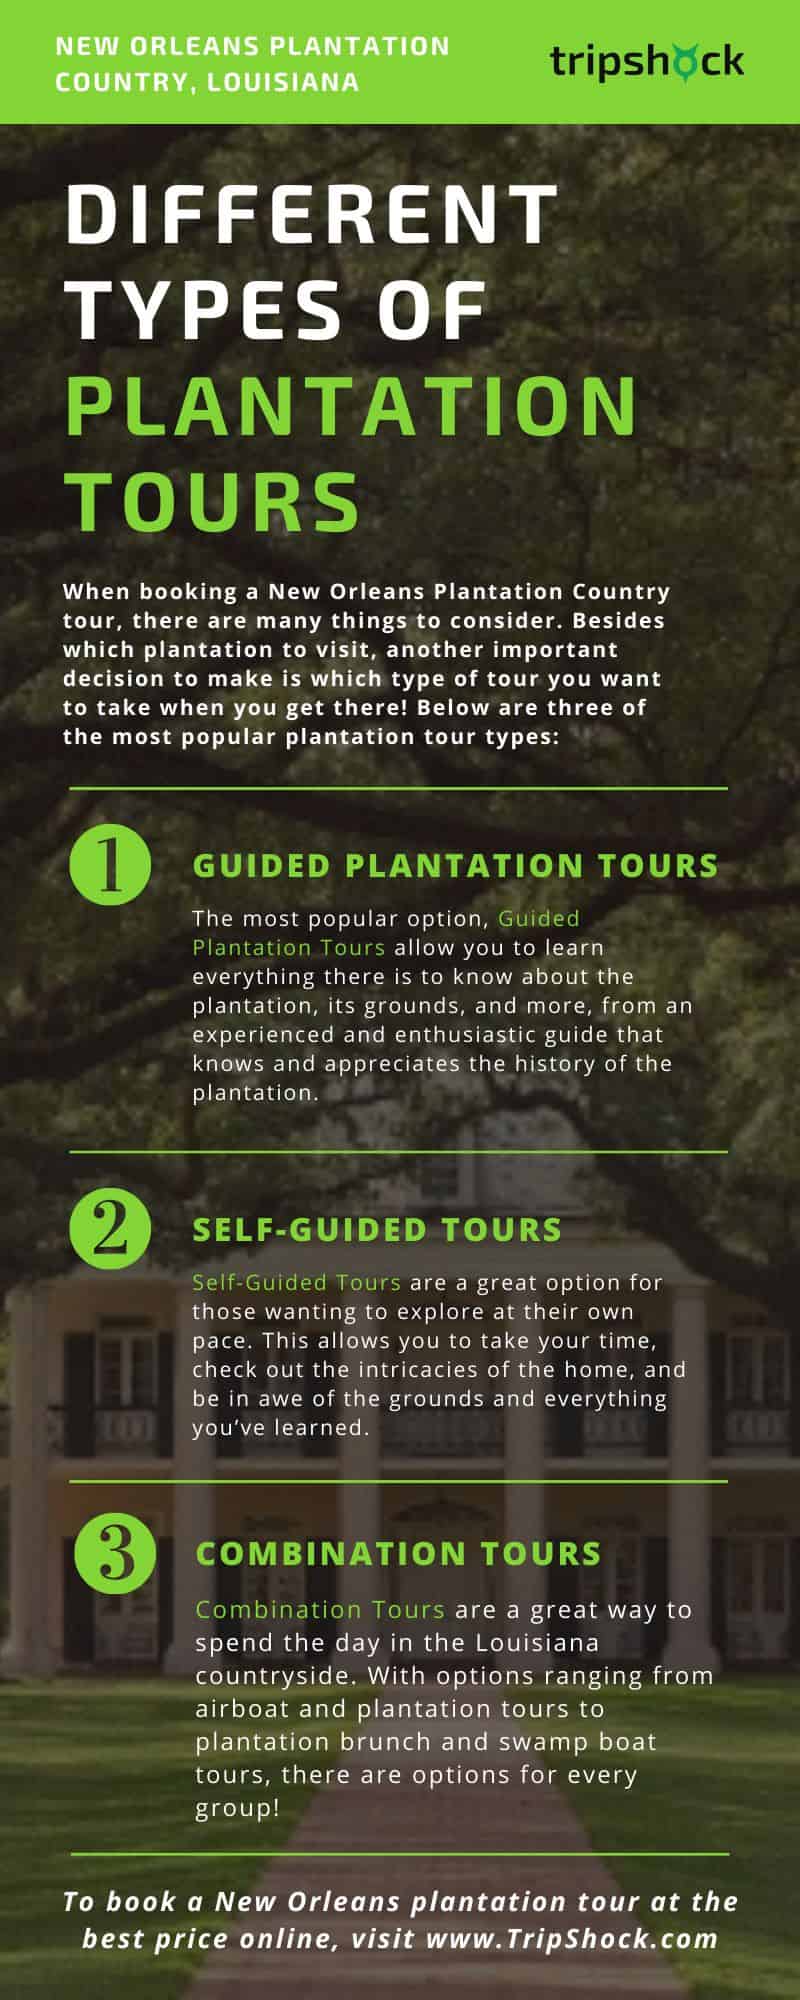 different types of new orleans plantation tours